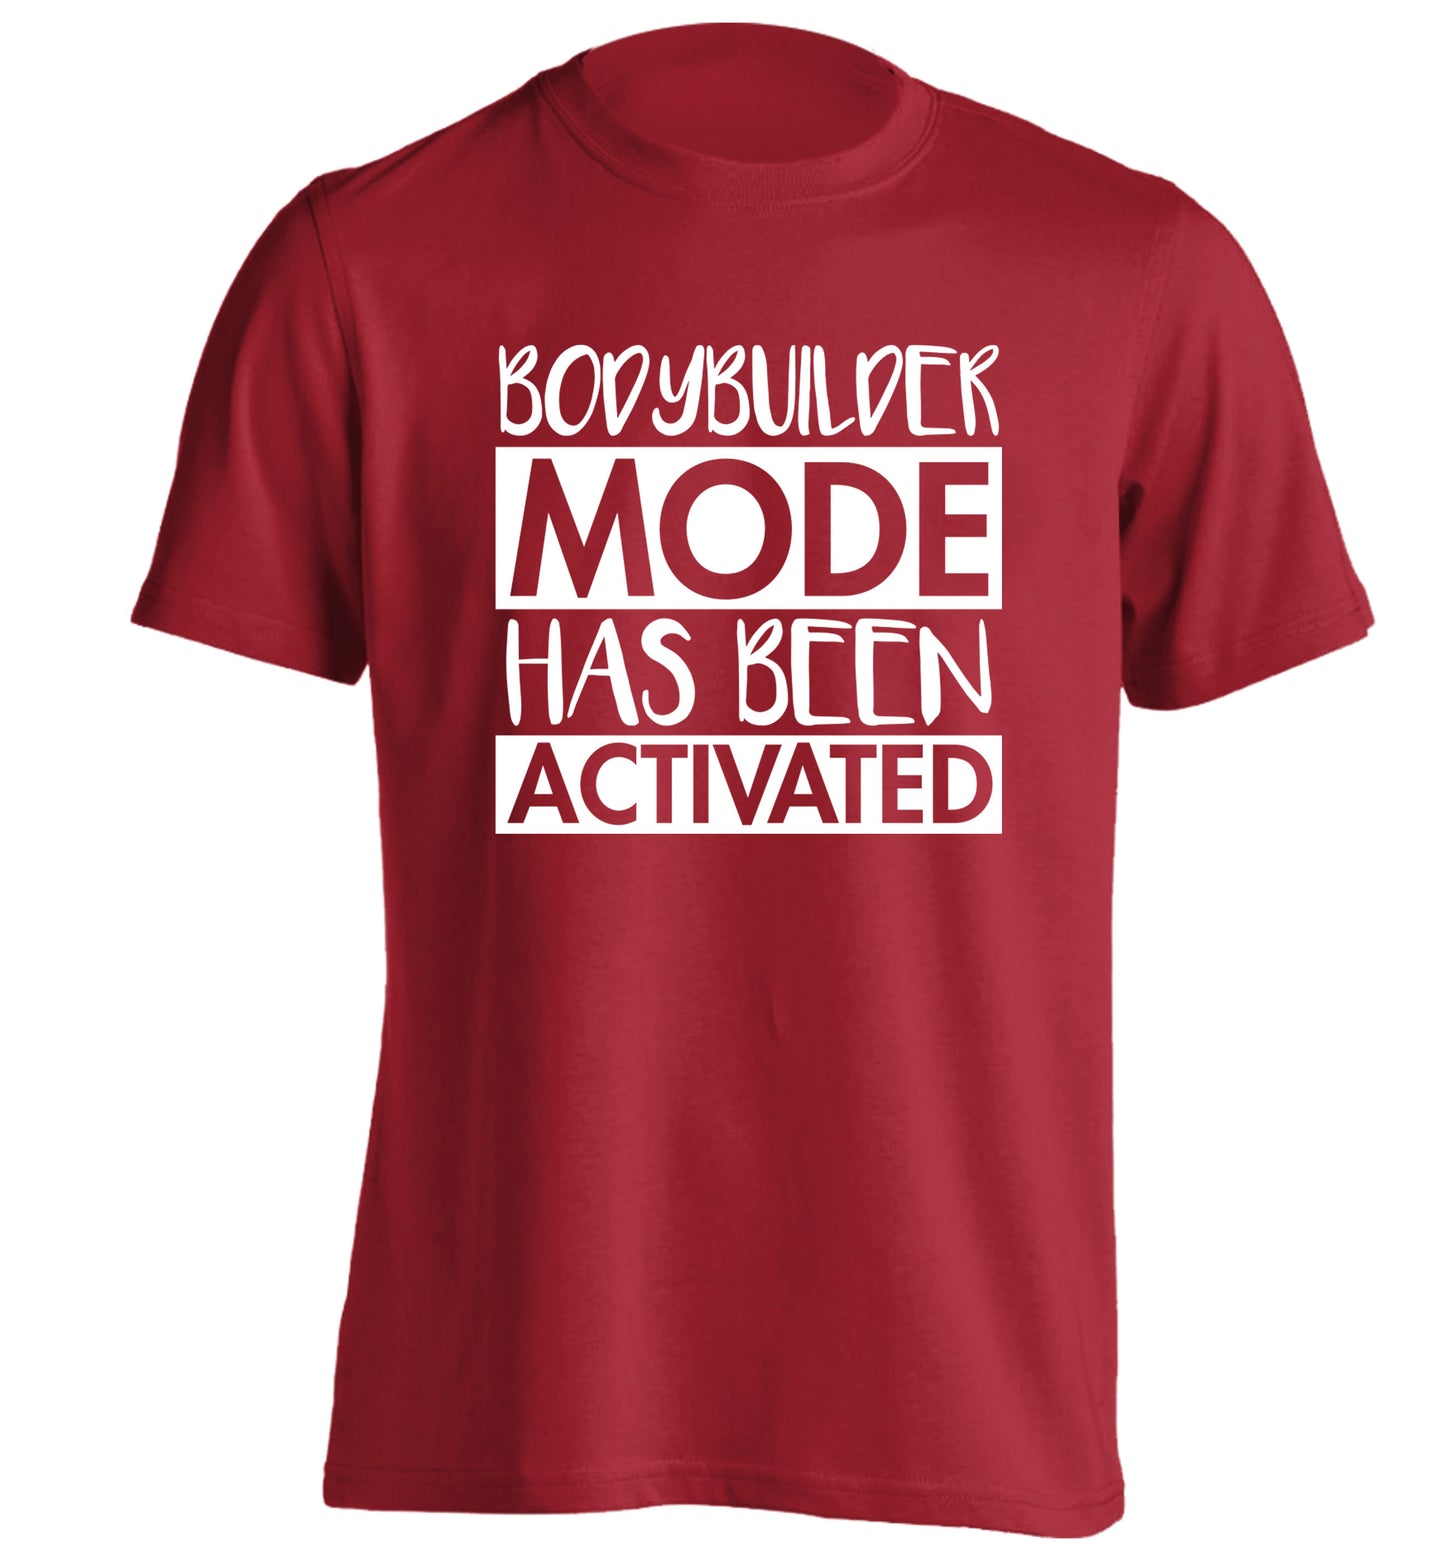 Bodybuilder mode activated adults unisex red Tshirt 2XL